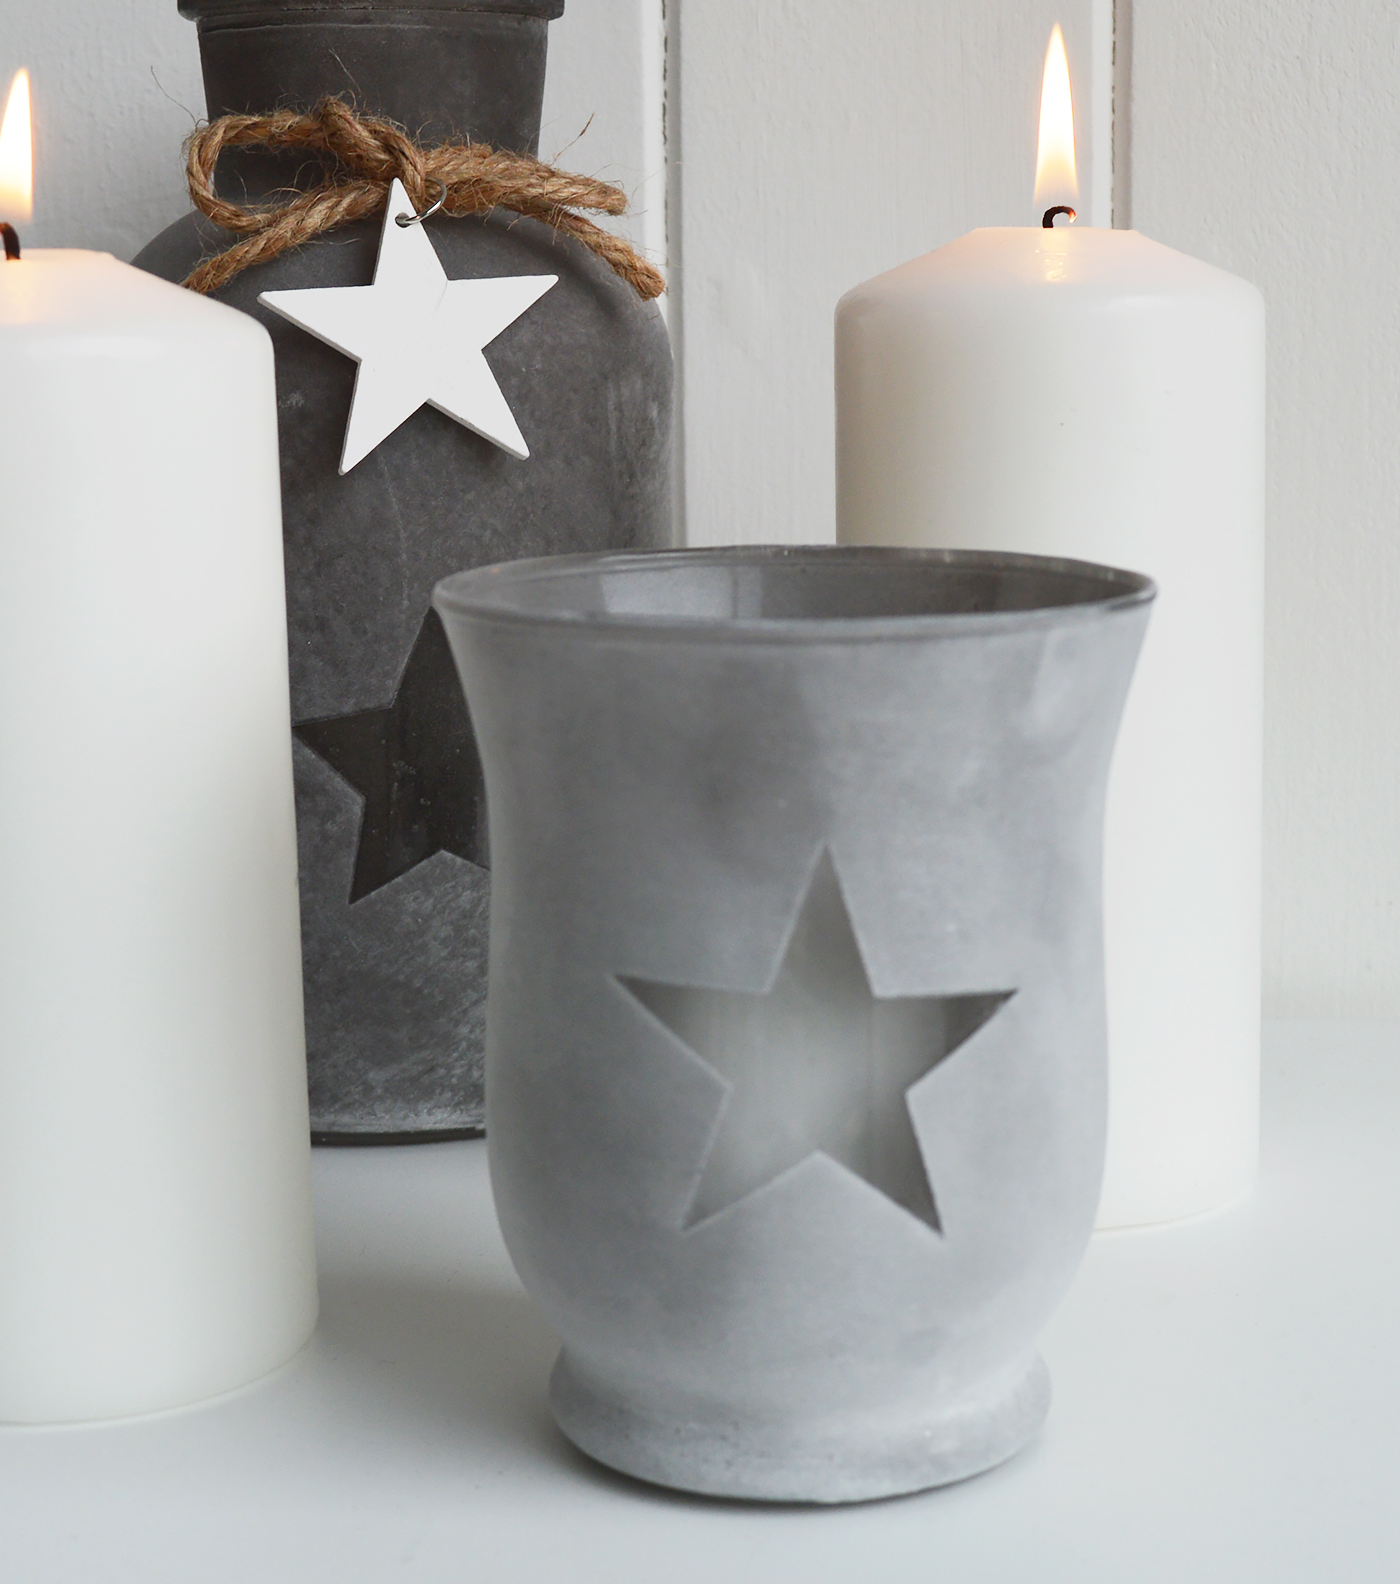 Etched glass  lantern candle holder with stars from The White Lighthouse. New England , coastal, country and white furniture and home interiors for the hallway, living room, bedroom and bathroom